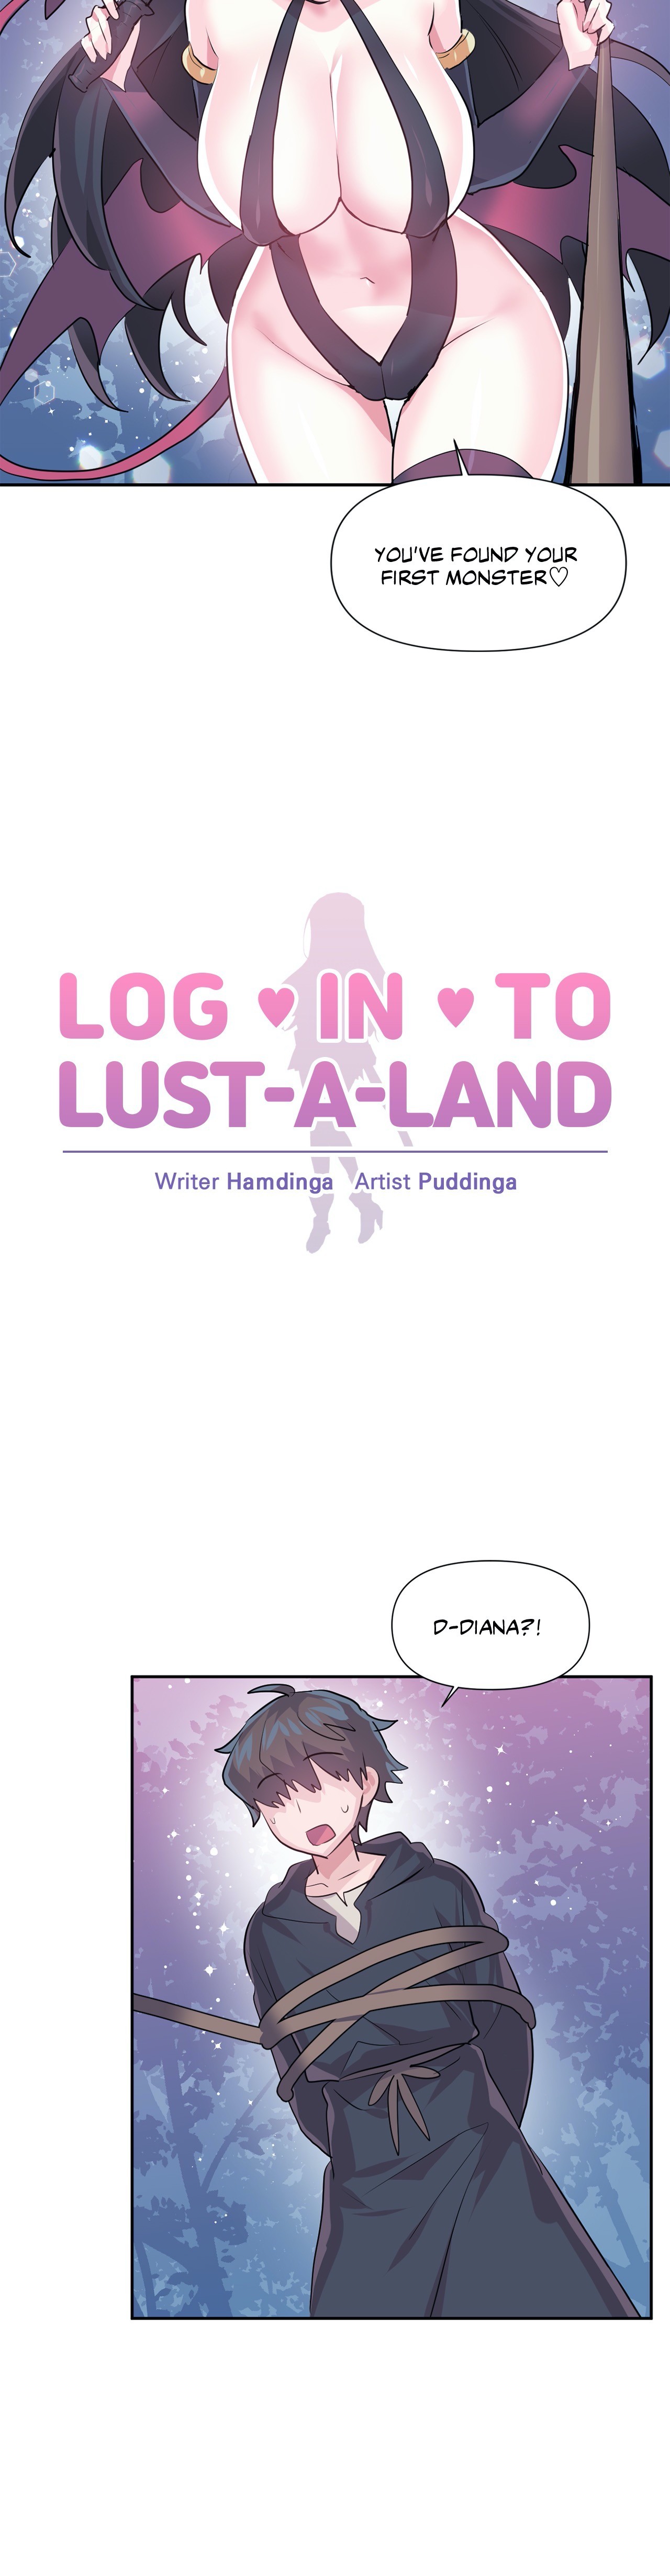 Log in to Lust-a-land image